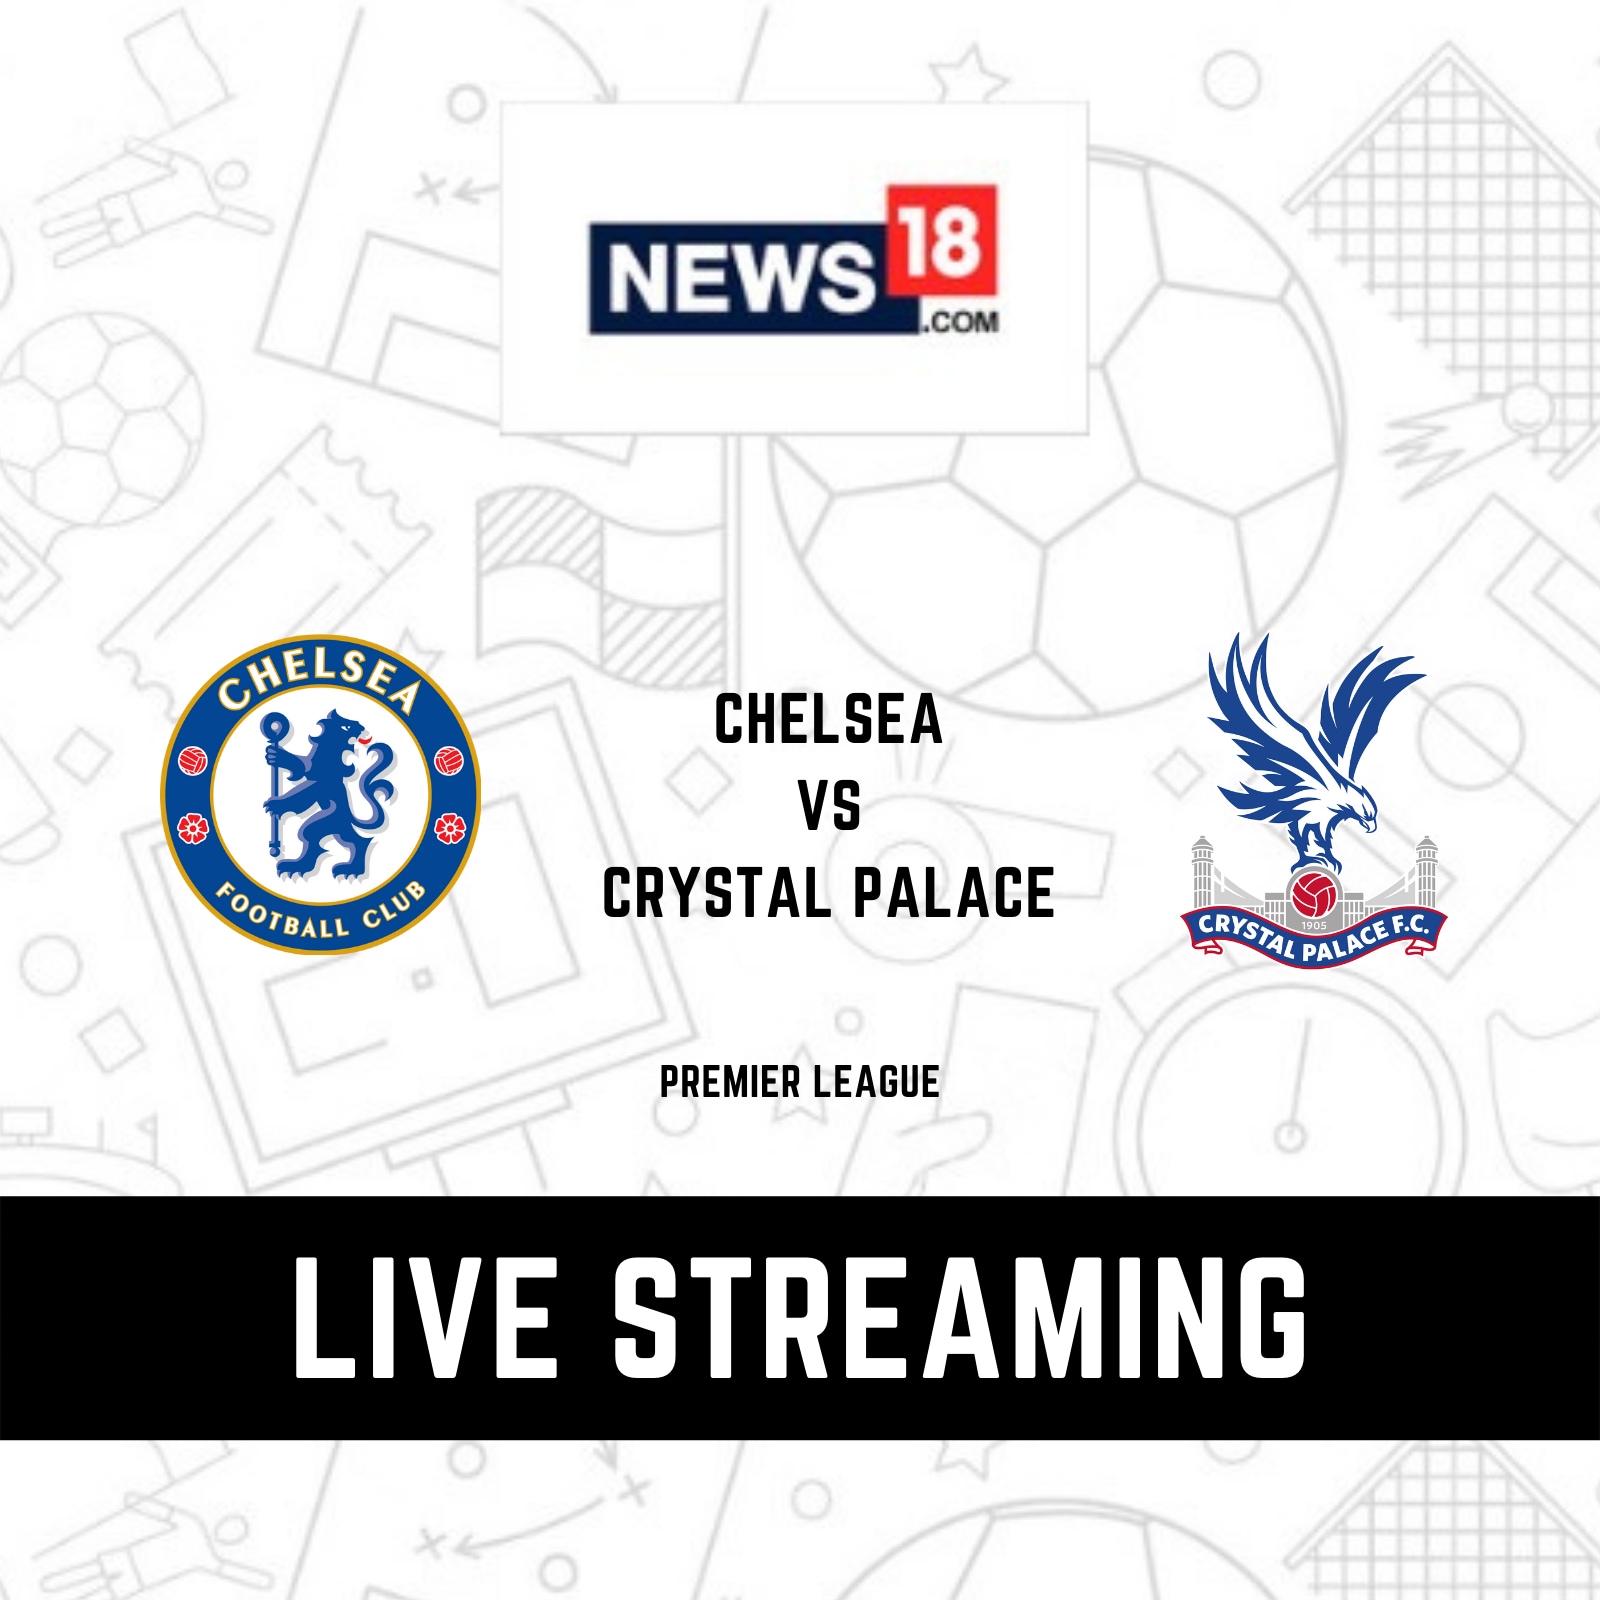 Premier League Chelsea vs Crystal Palace LIVE Streaming When and Where to Watch Online, TV Telecast, Team News